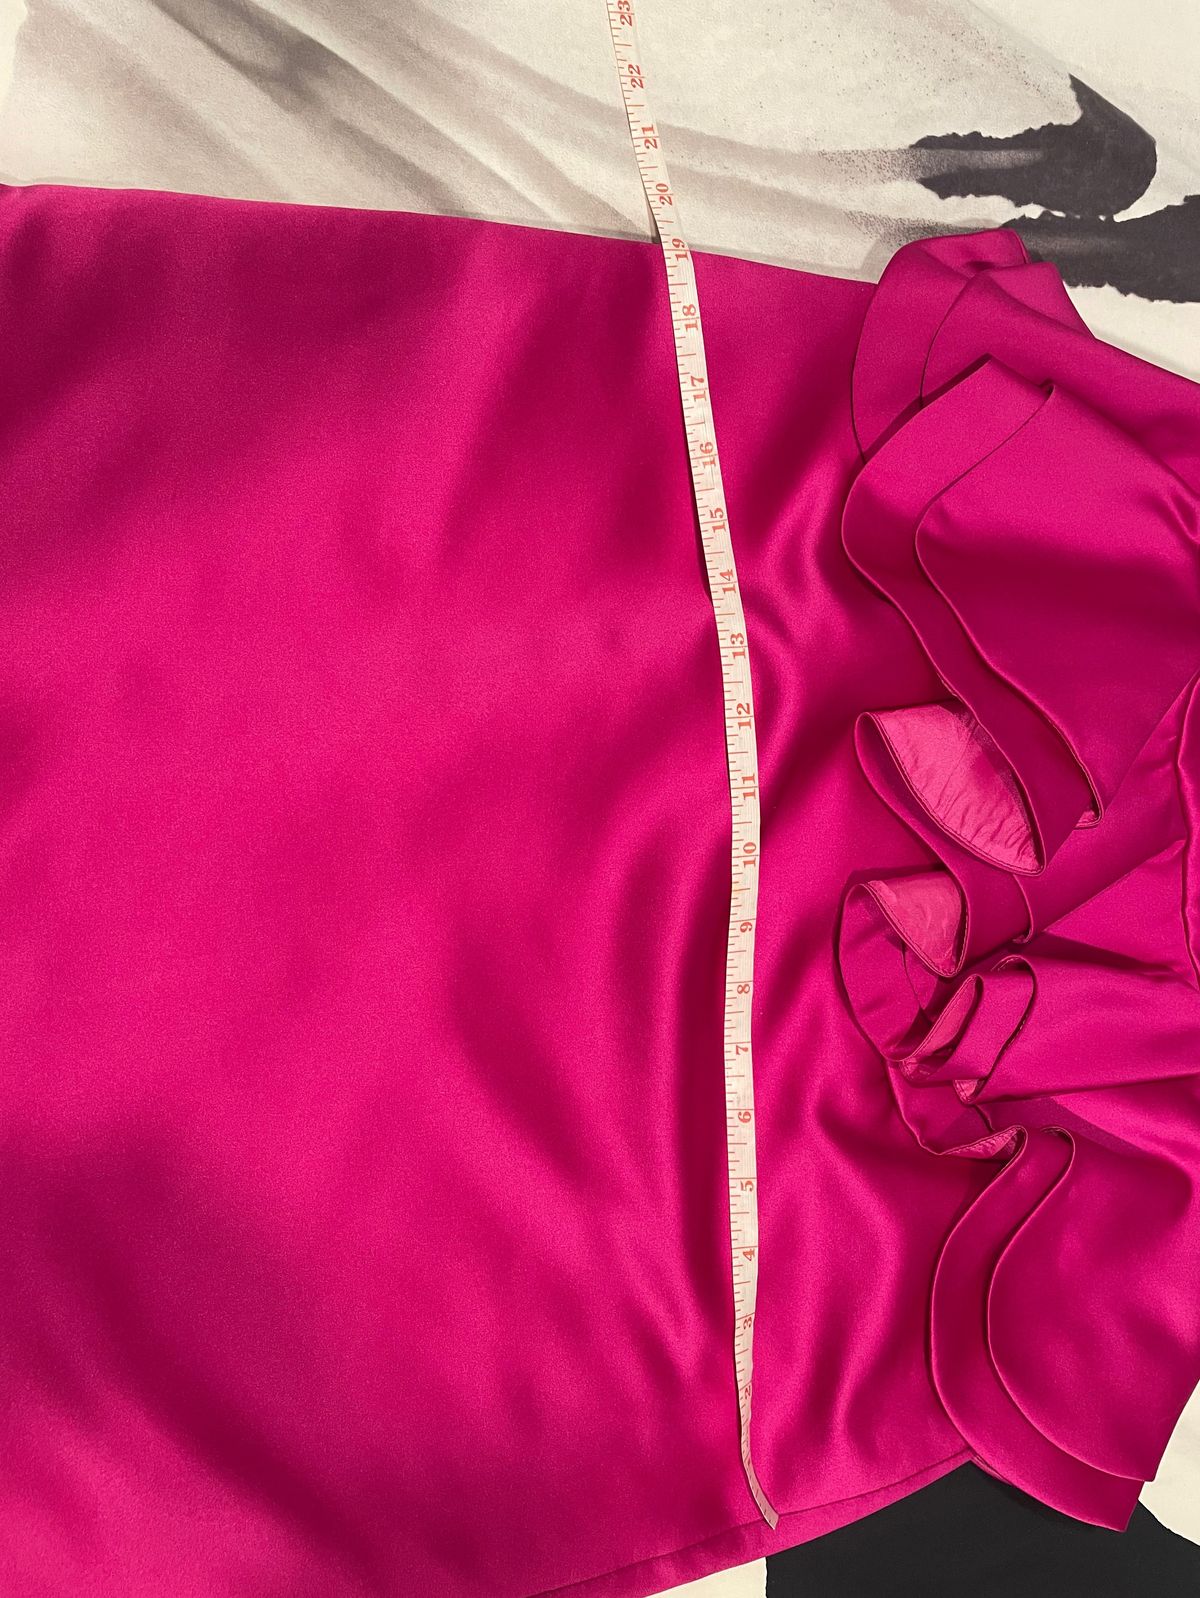 Ashley Lauren Size 8 Homecoming Plunge Satin Hot Pink A-line Dress on Queenly